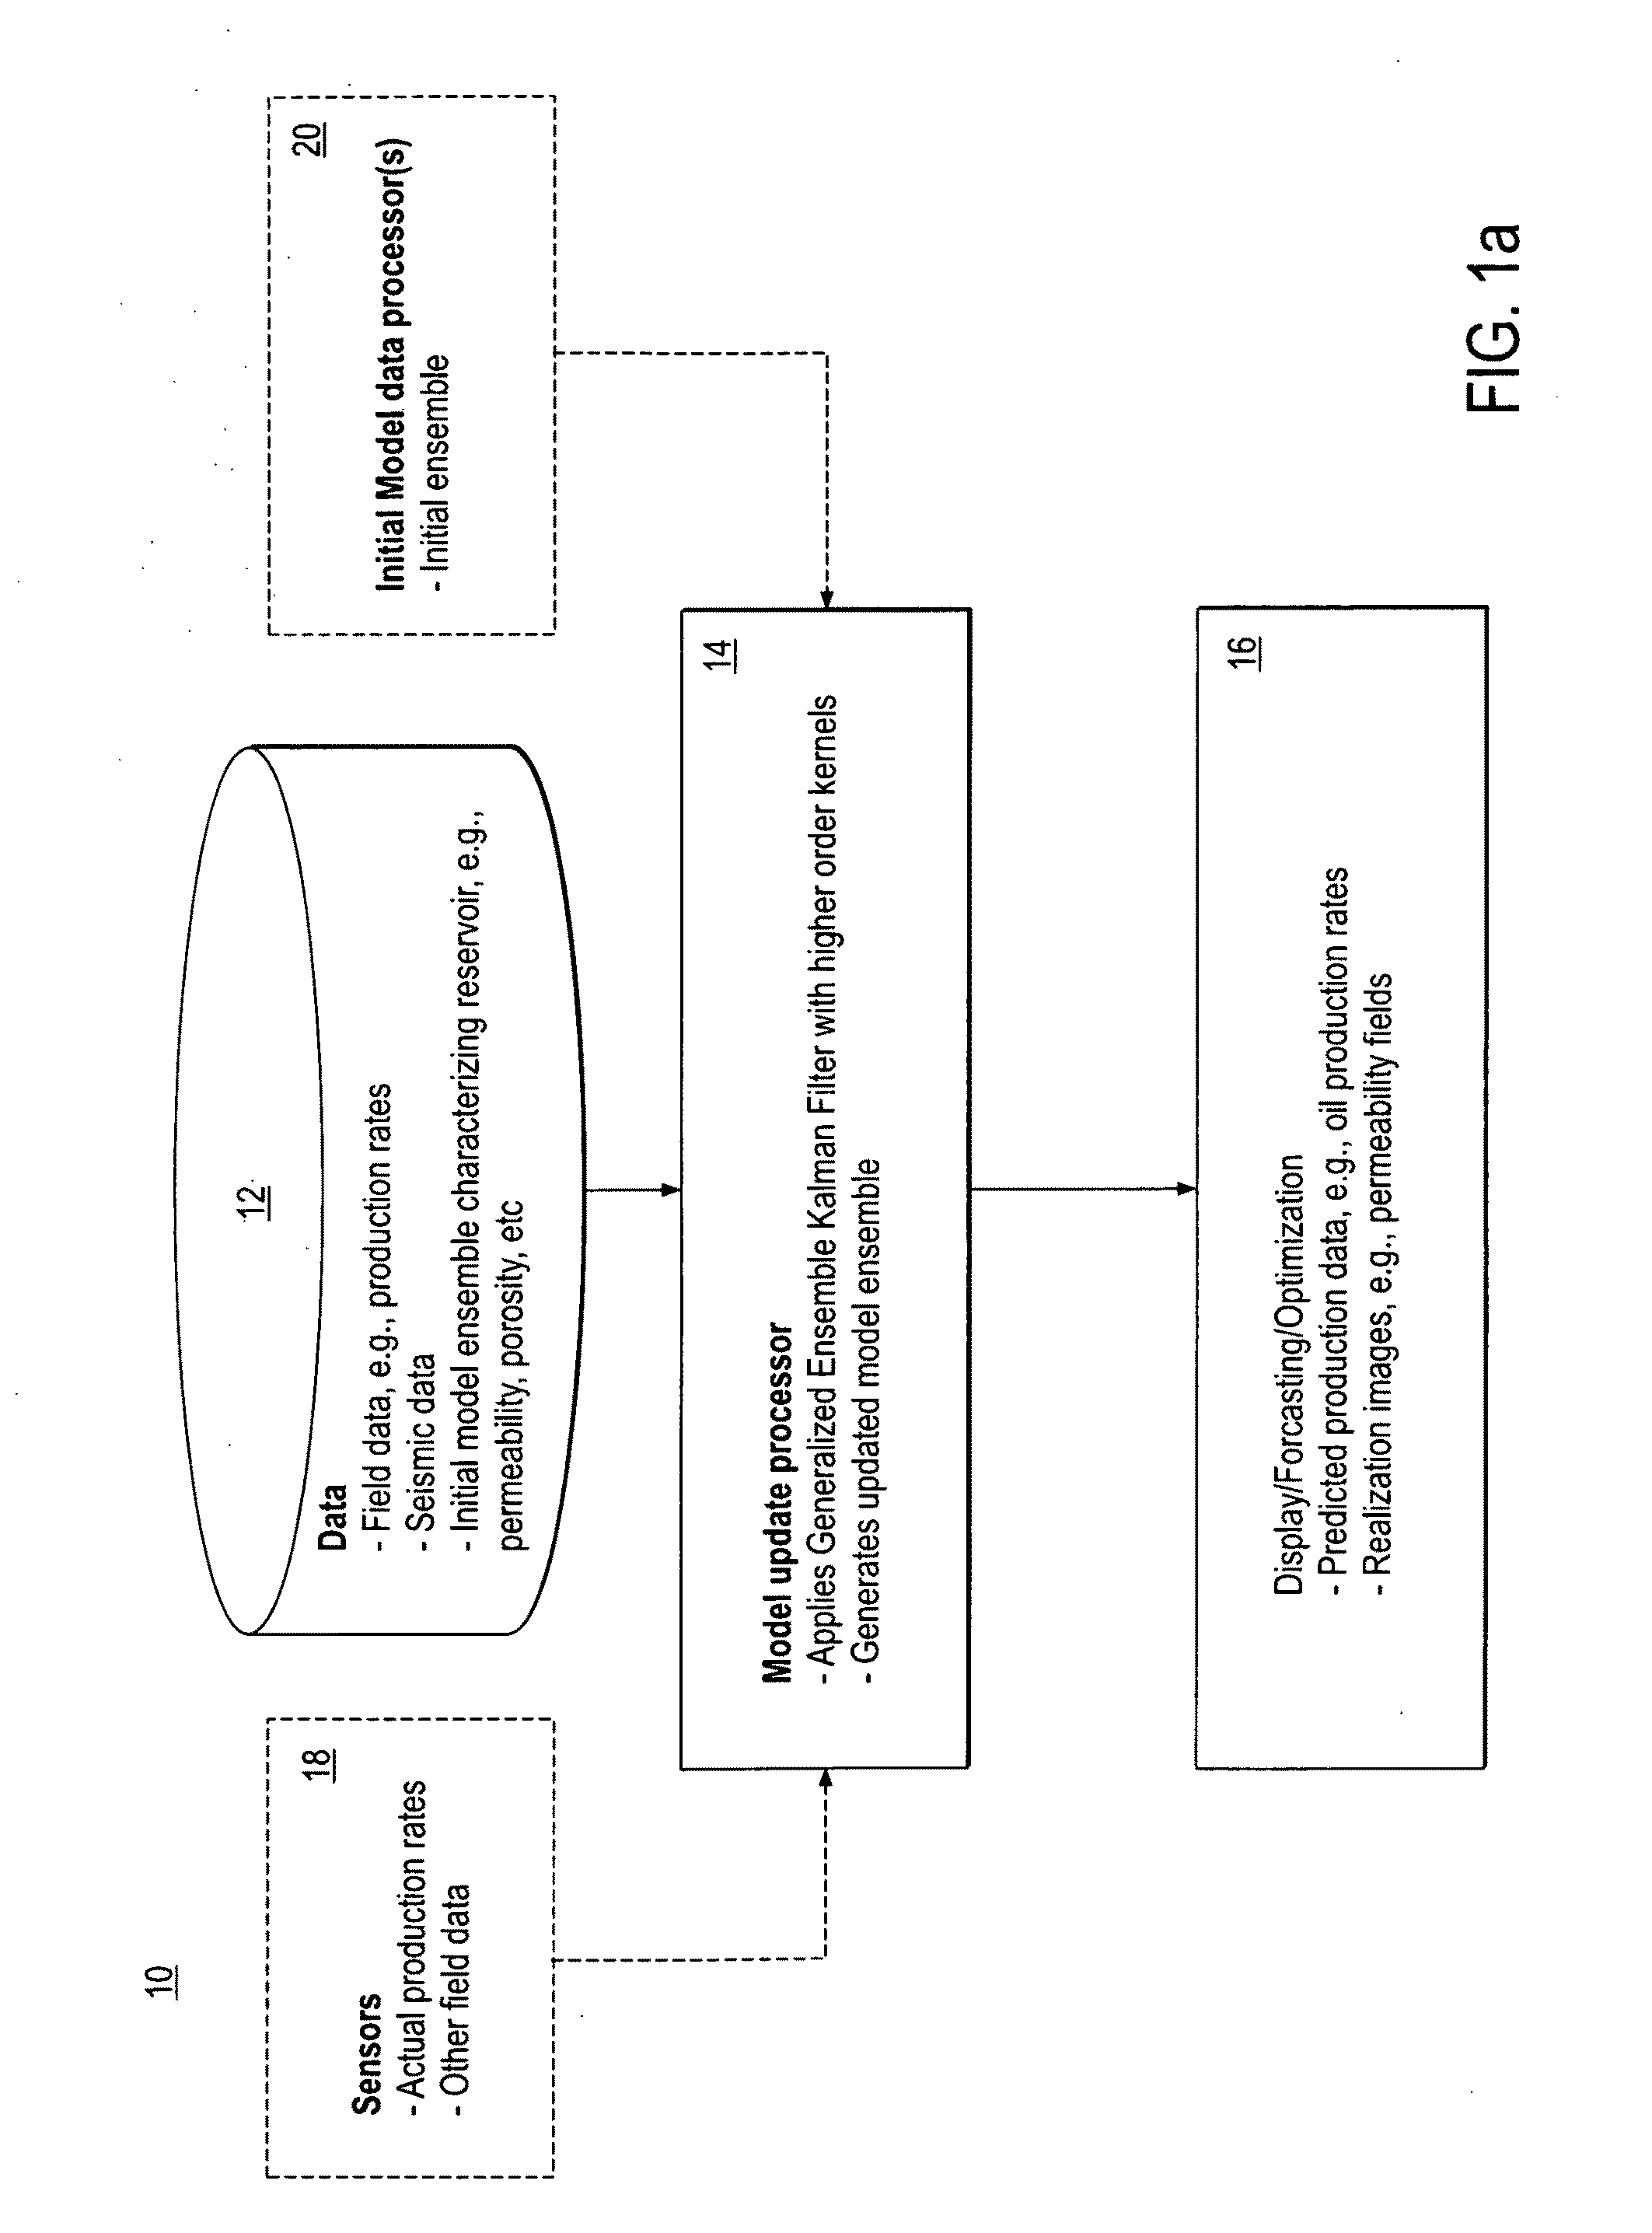 System and method for predicting fluid flow in subterranean reservoirs